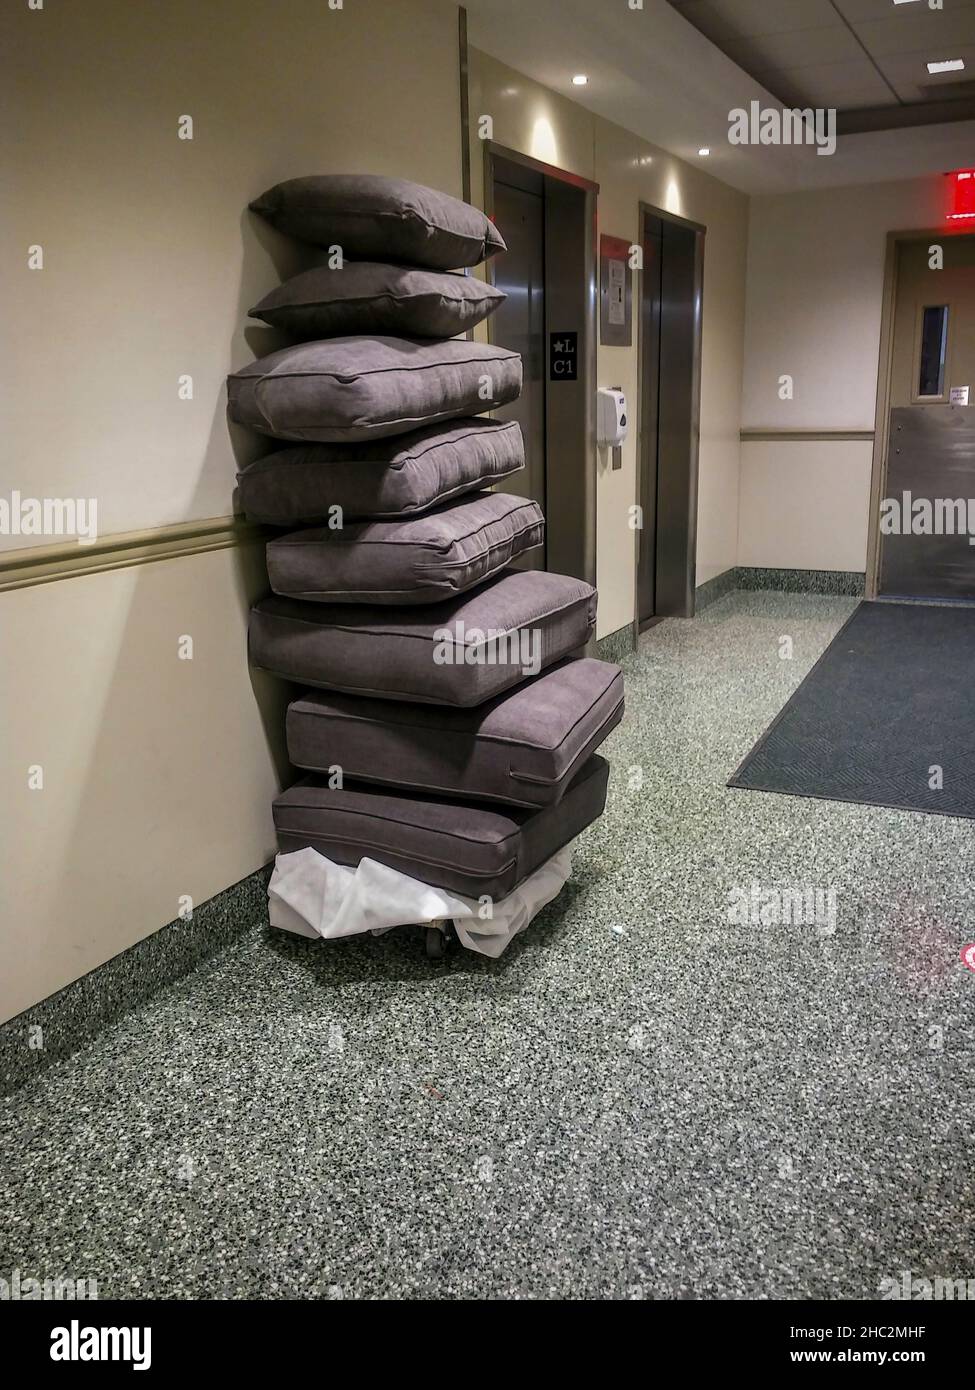 Couch cushions during a move out in an apartment building in New York on Thursday, December 2, 2021. (© Richard B. Levine) Stock Photo